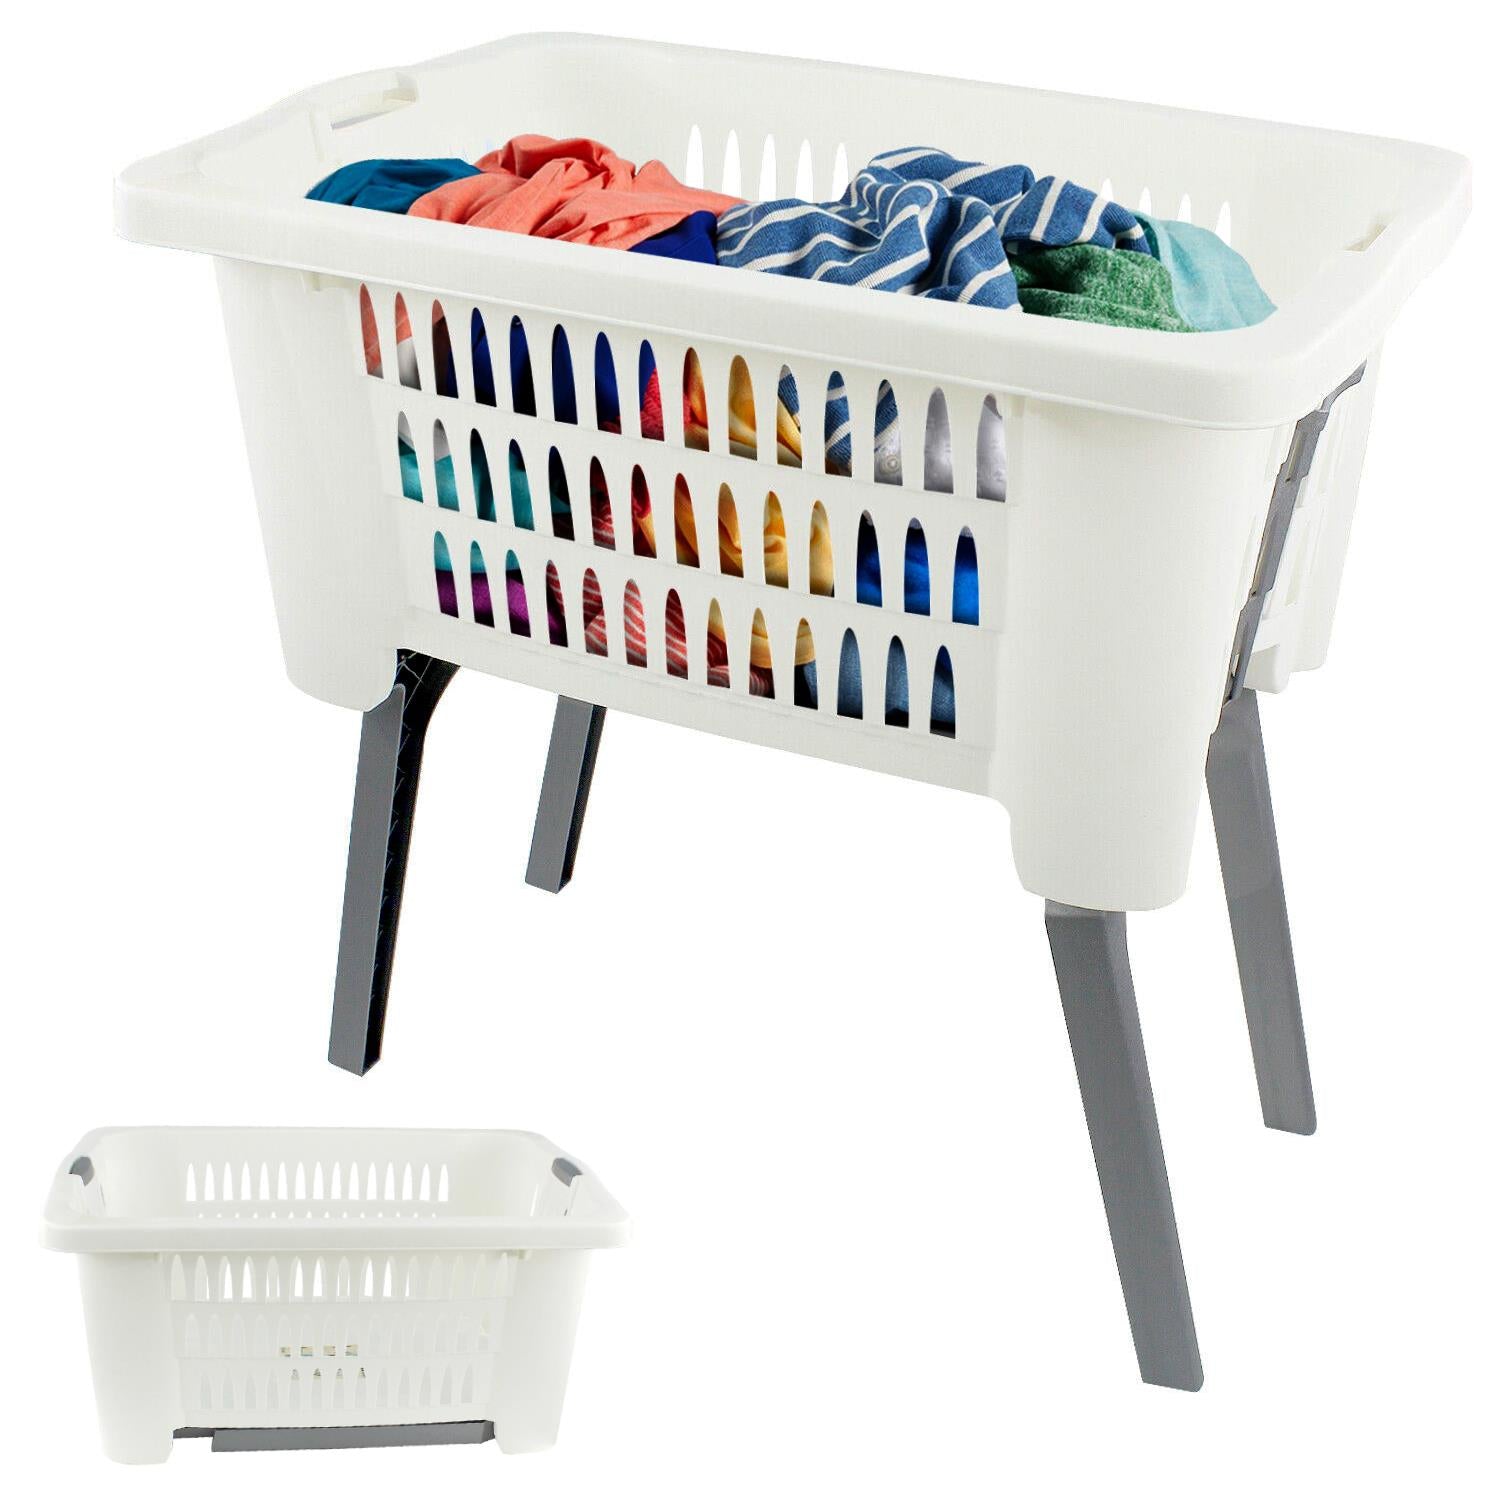 Laundry Basket with Foldable Legs by GEEZY - UKBuyZone